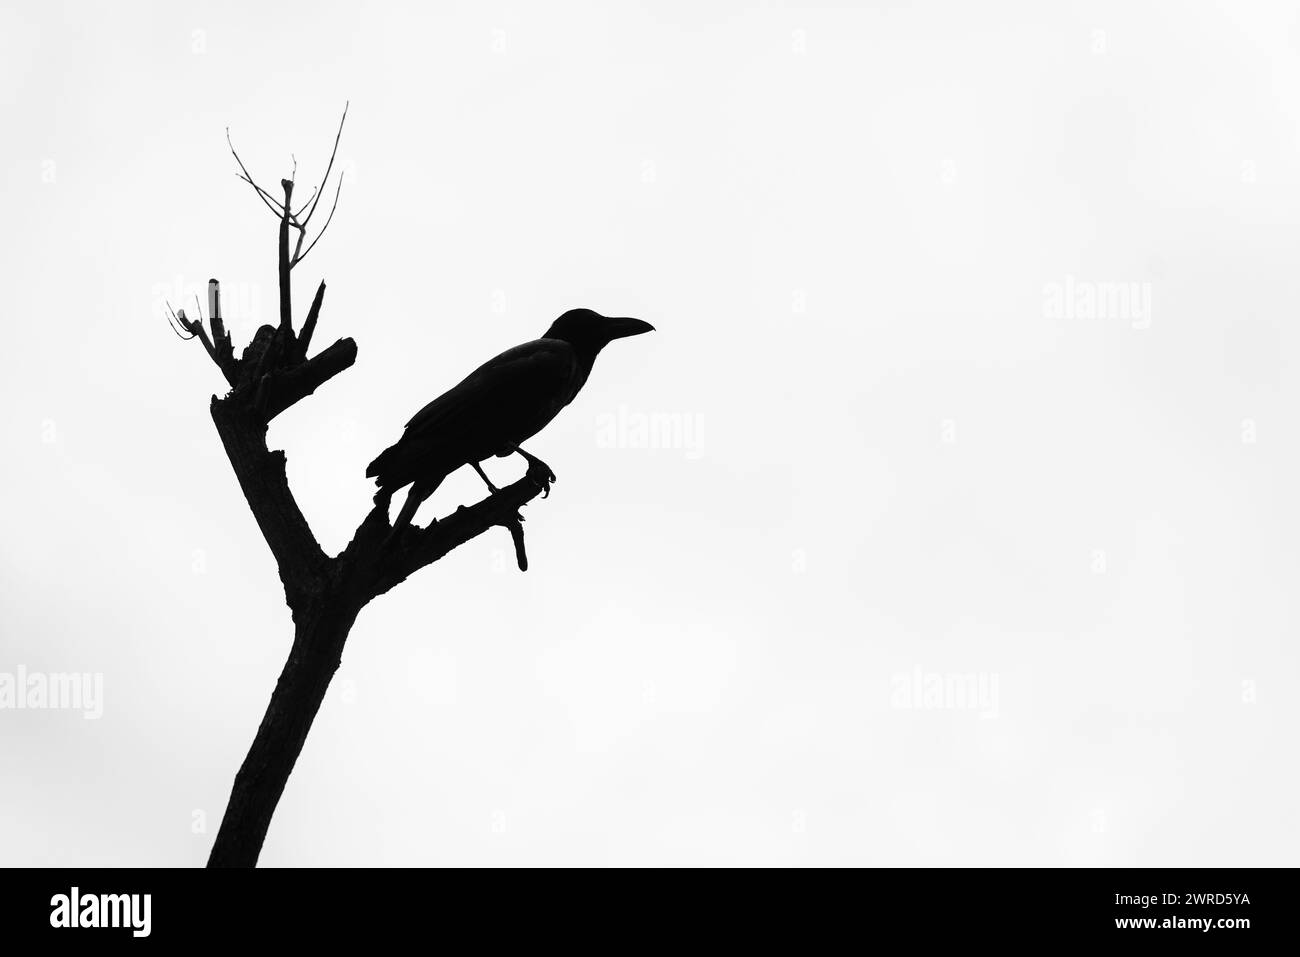 Common black raven silhouette sits watches old dry tree Stock Photo